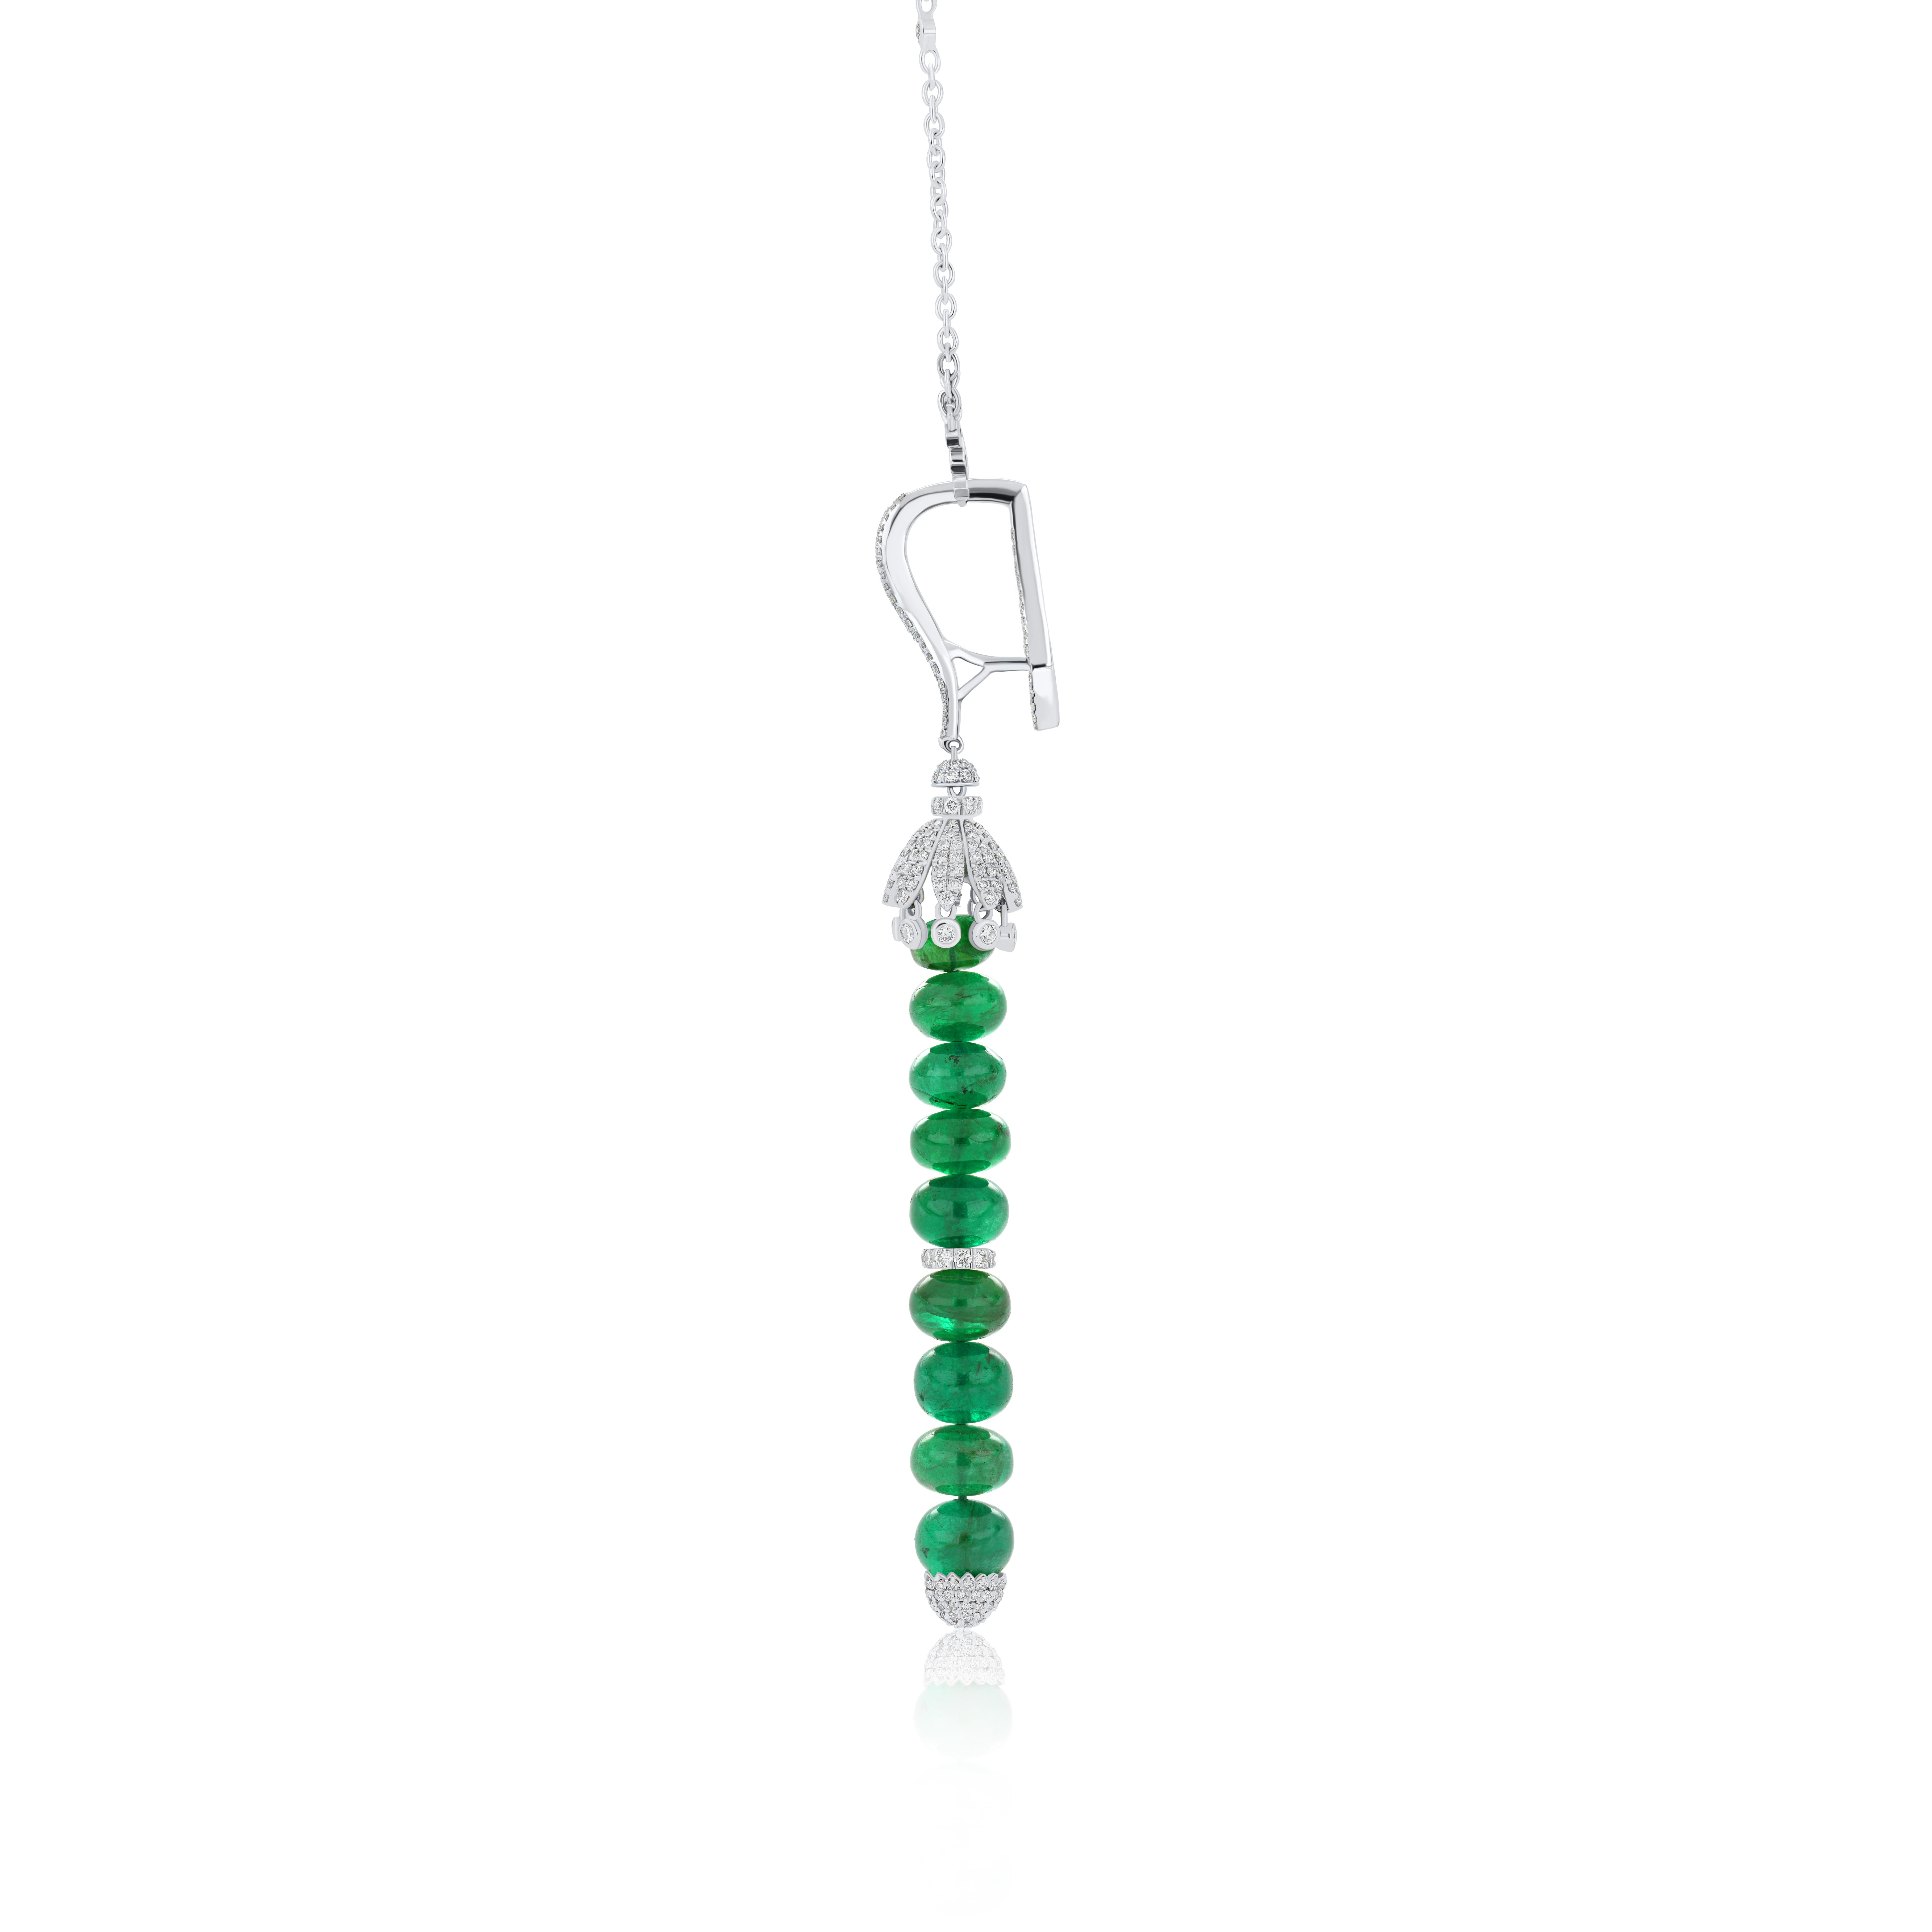 Elegant and Exquisitely Detailed 18 Karat White Gold Enhancer lock Pendant, Studded with  Emerald Beads weigh in approx. 25.40Cts and with micro pave set Diamonds approx. 2.16Cts. Further to enhance the looks white gold chain with bezel set diamond